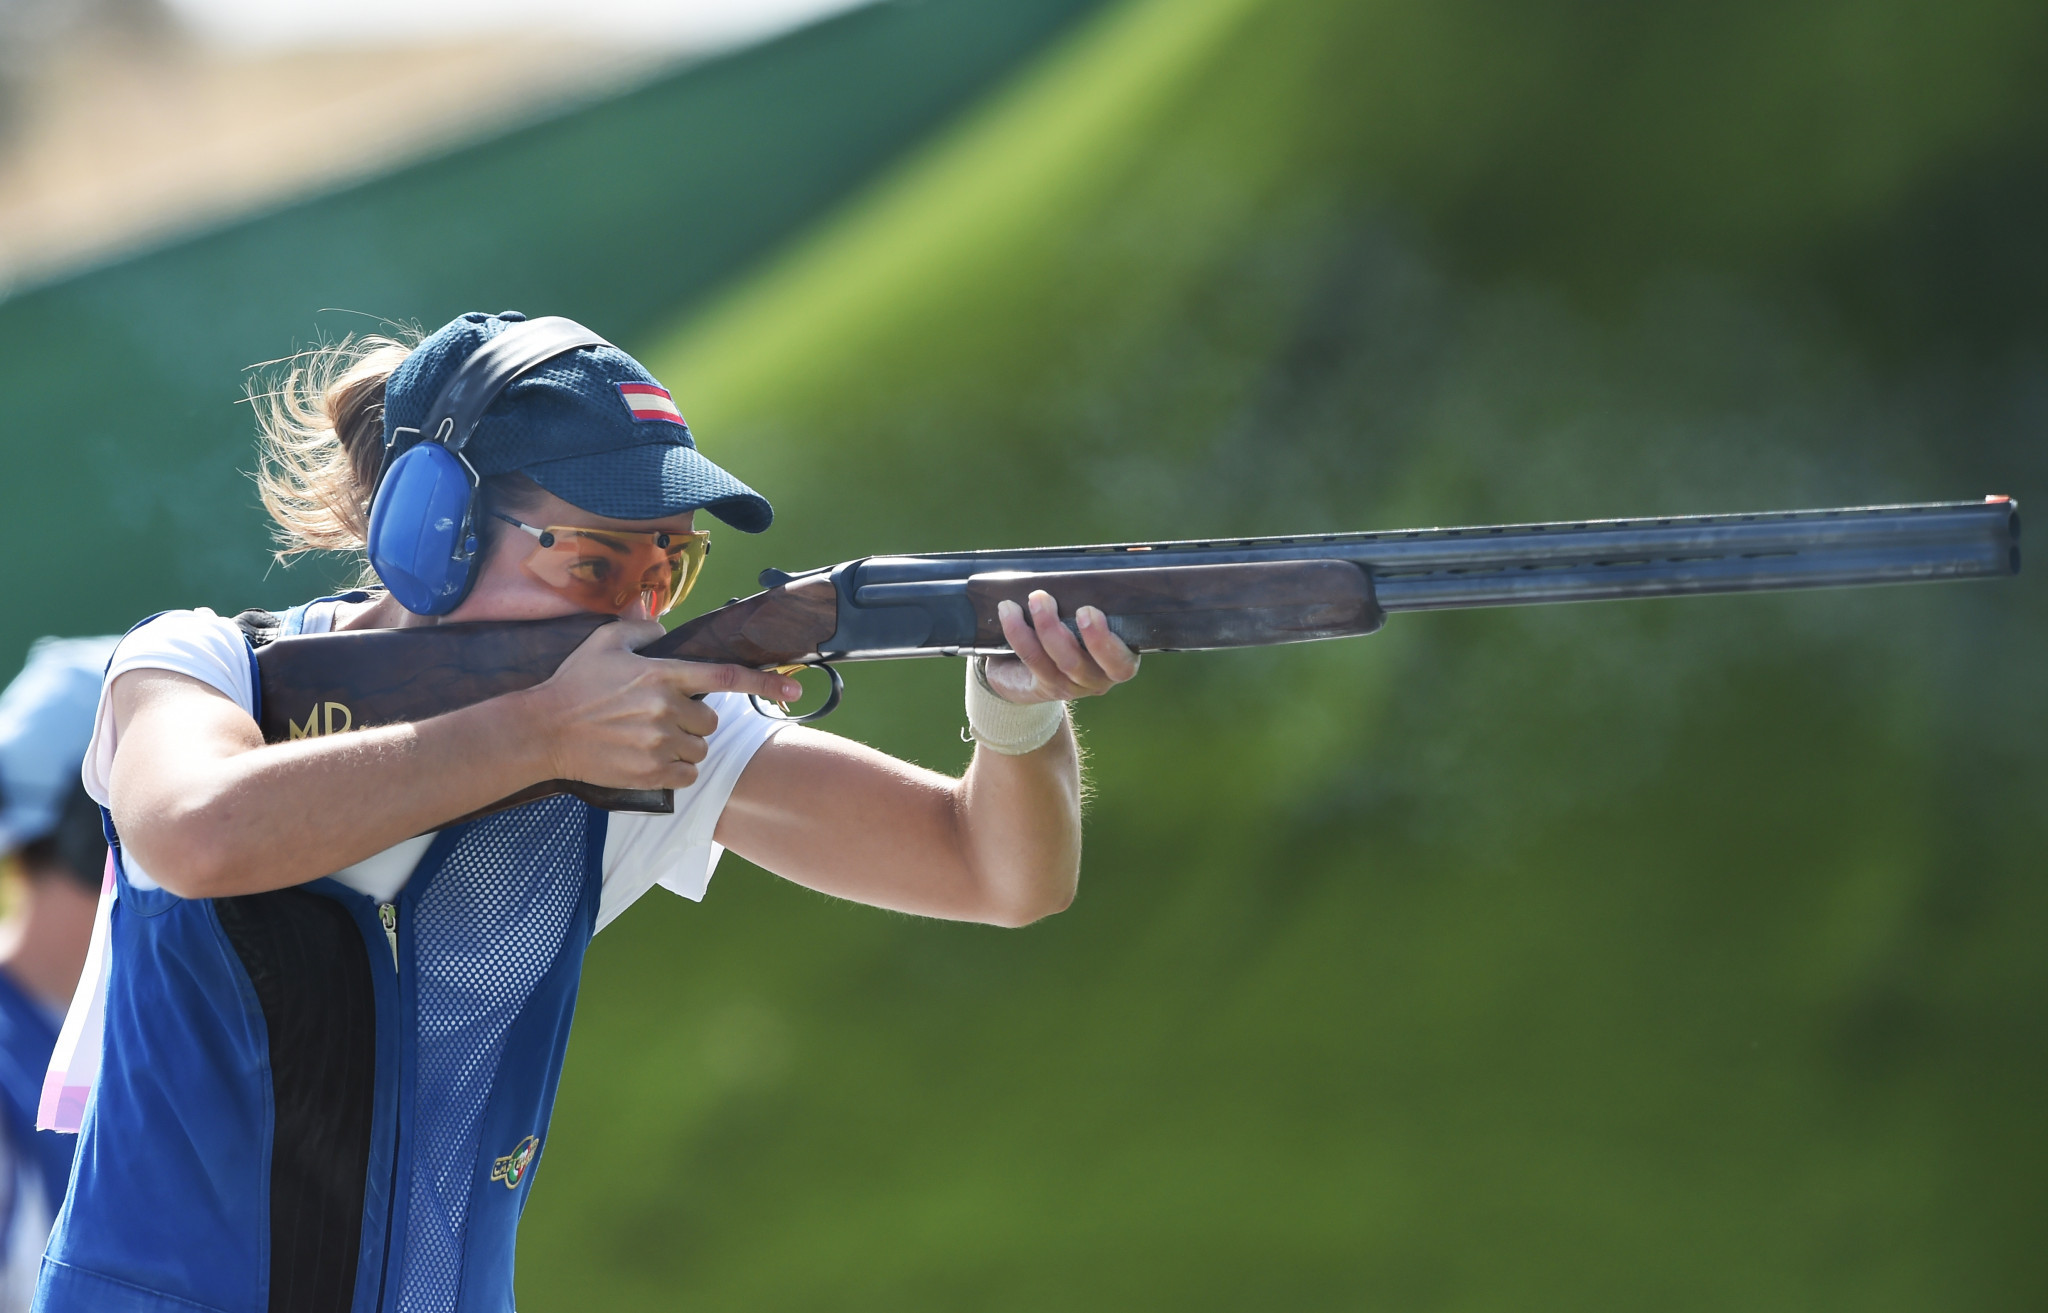 Fátima Gálvez helped Spain claim the mixed team trap title at the European Championship Shotgun ©Getty Images